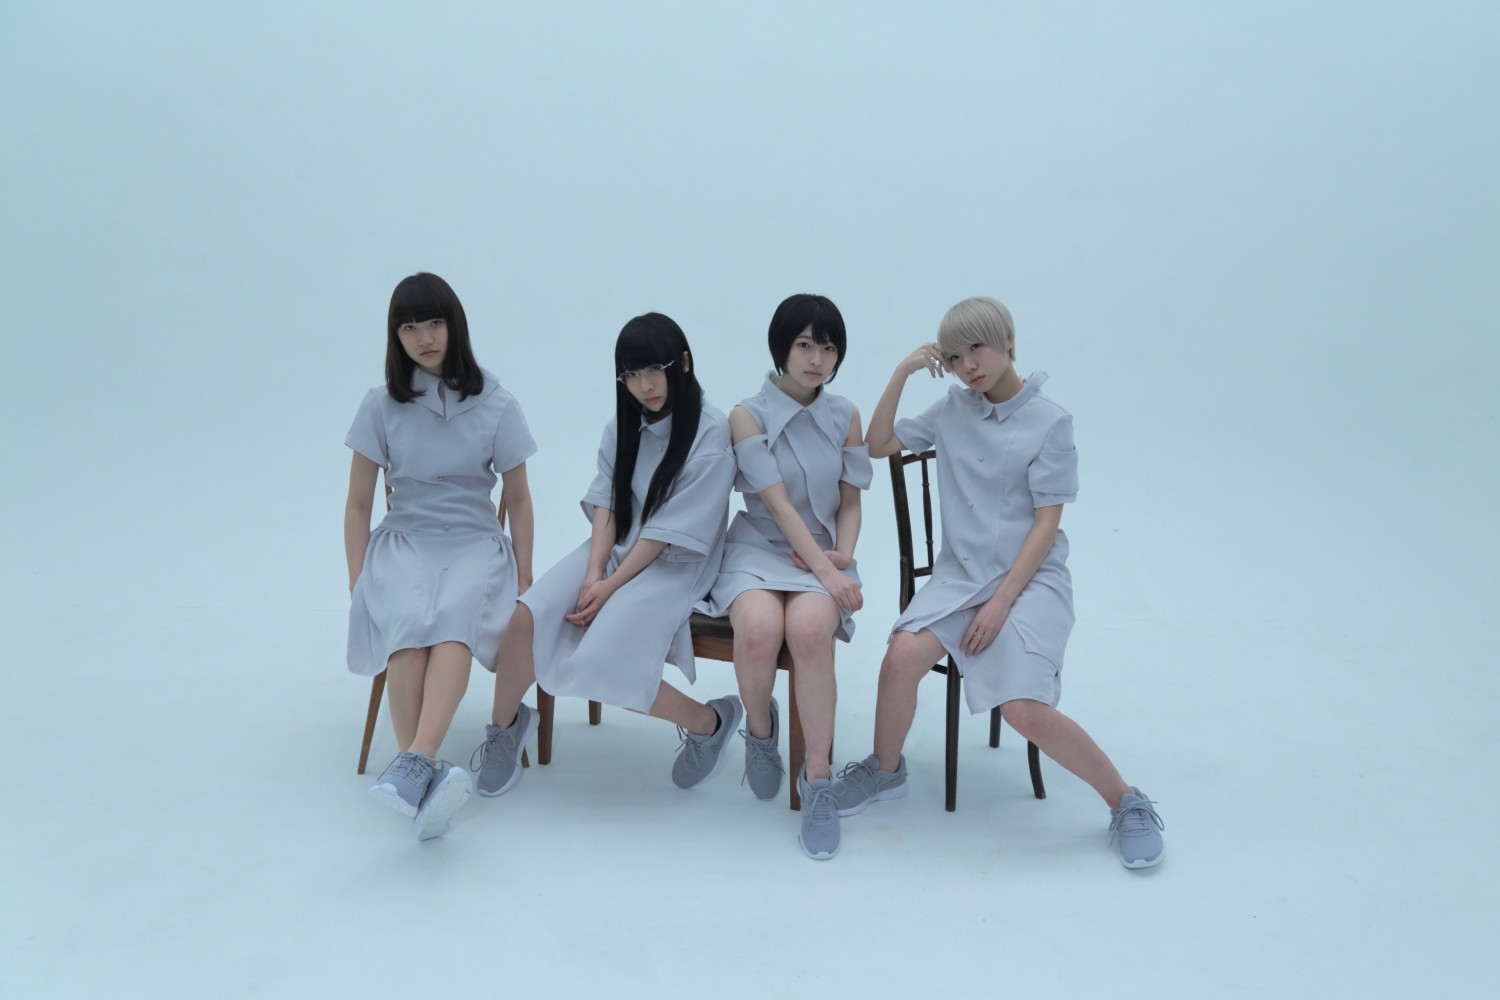 Discover the Bold New Monochromatic World of Maison book girl in the MV for “lost AGE”!